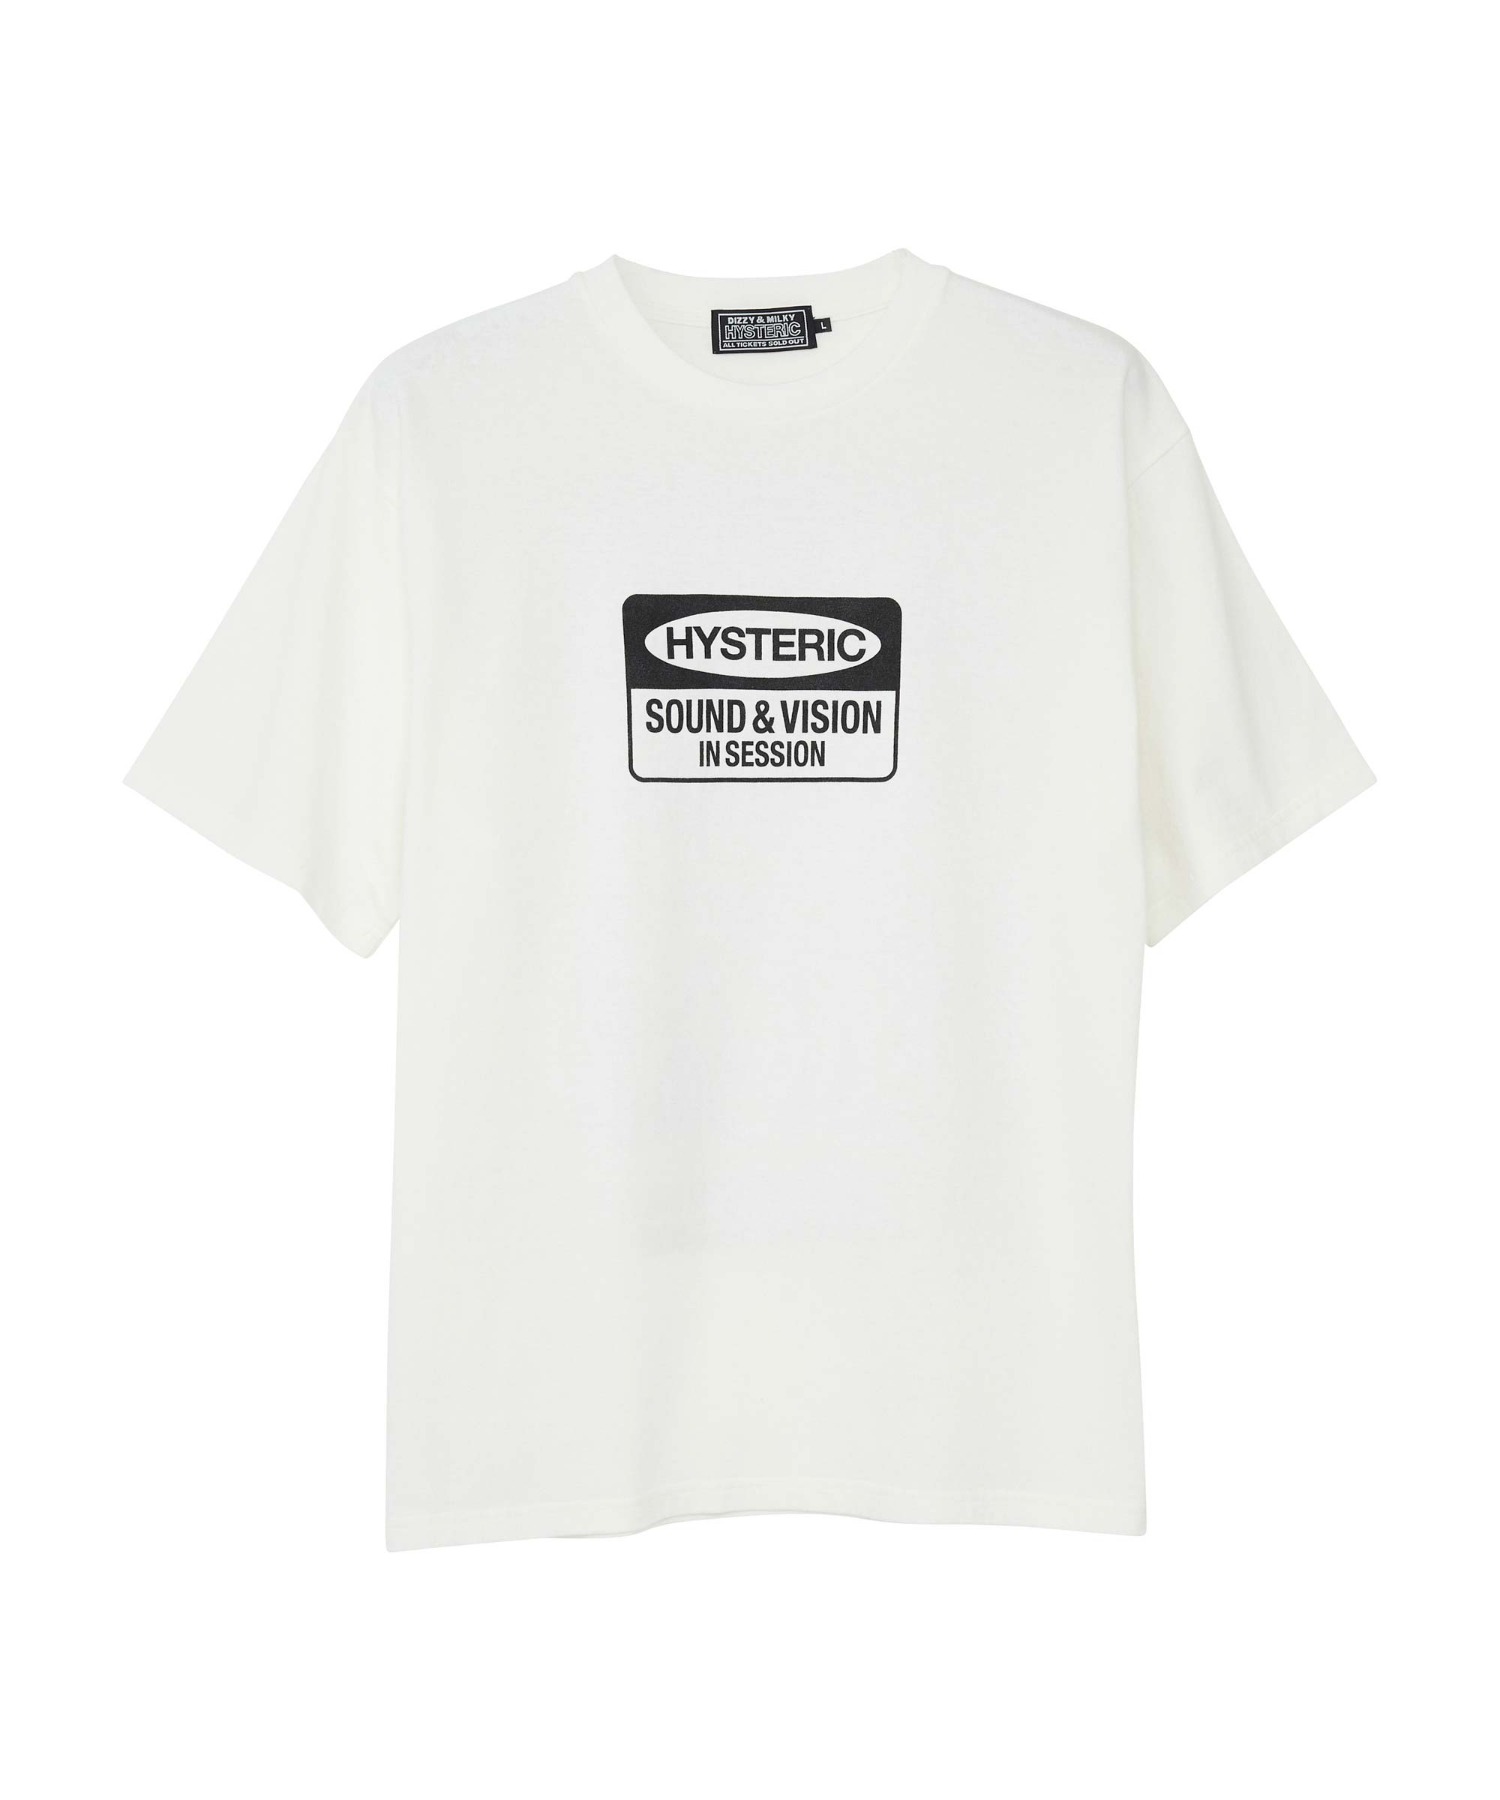 IN SESSION Tシャツ